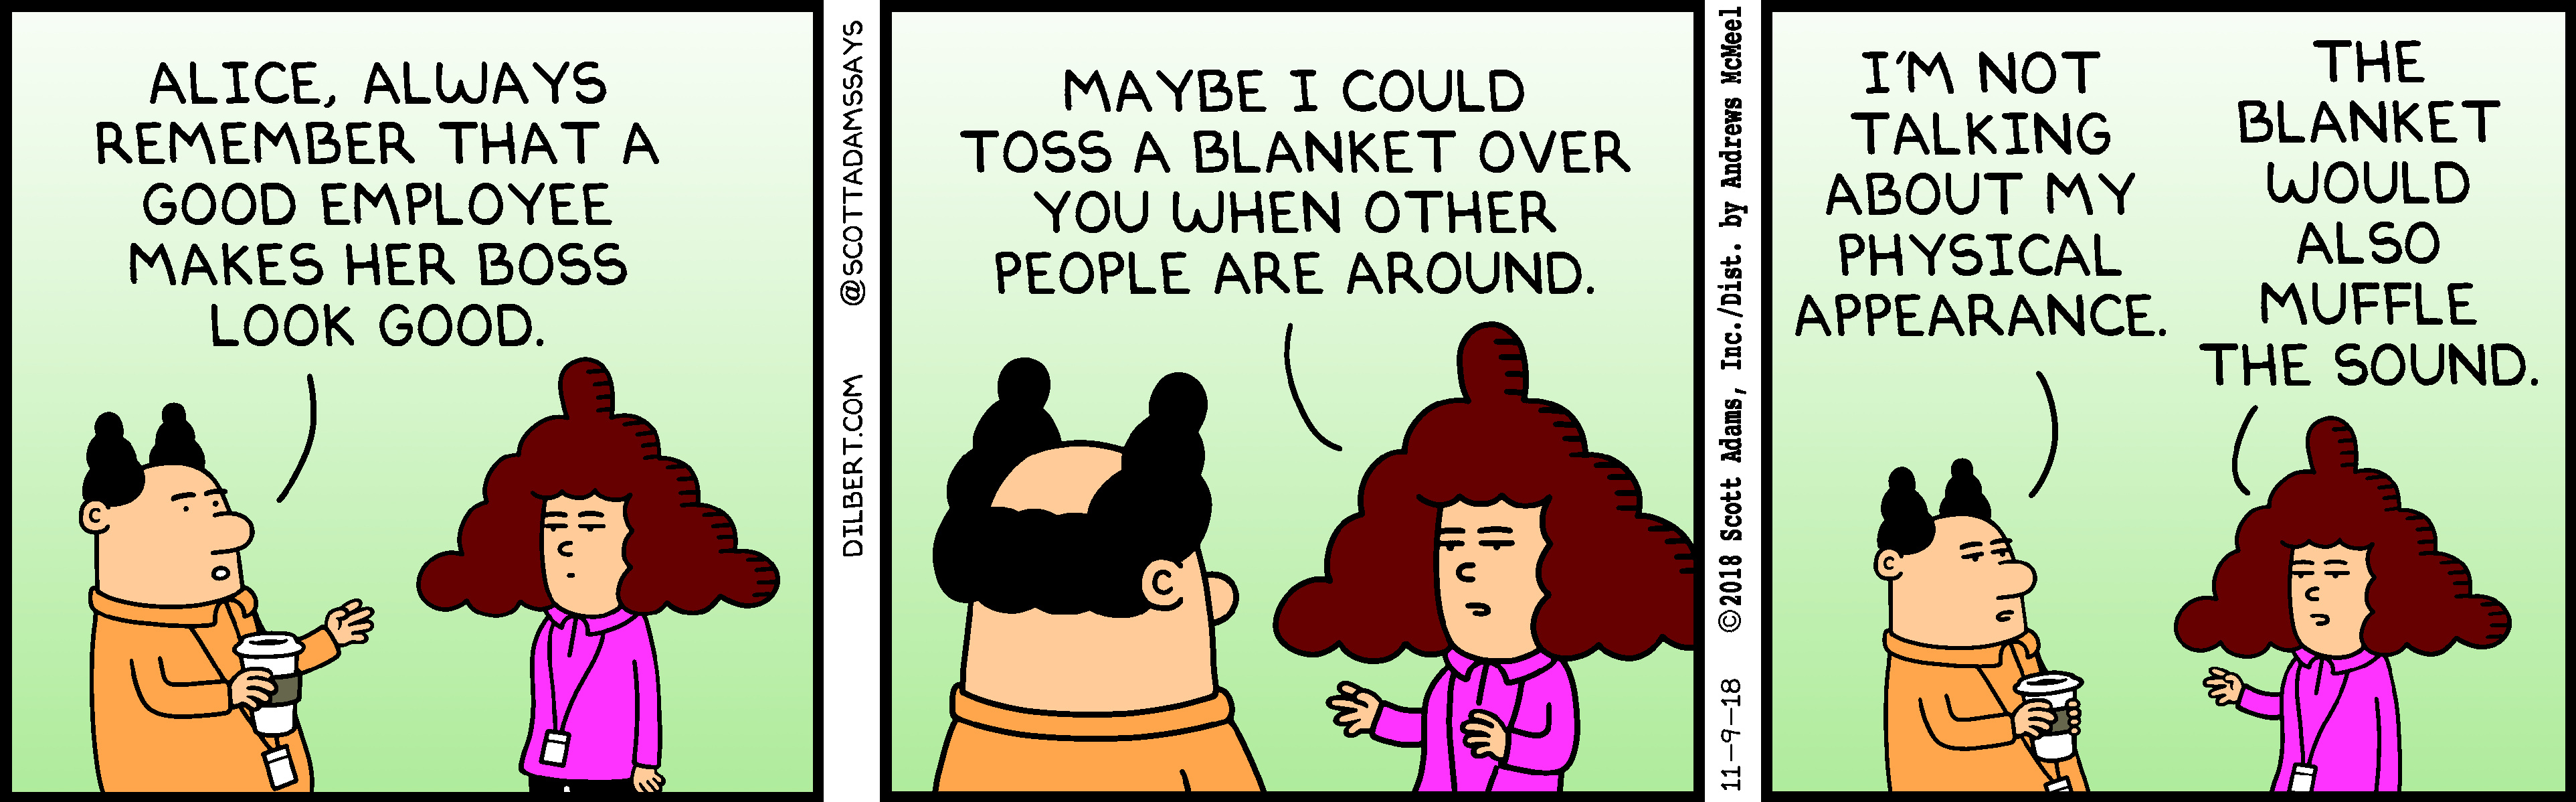 dilbert-comic-strips-every-day-electronics-weekly